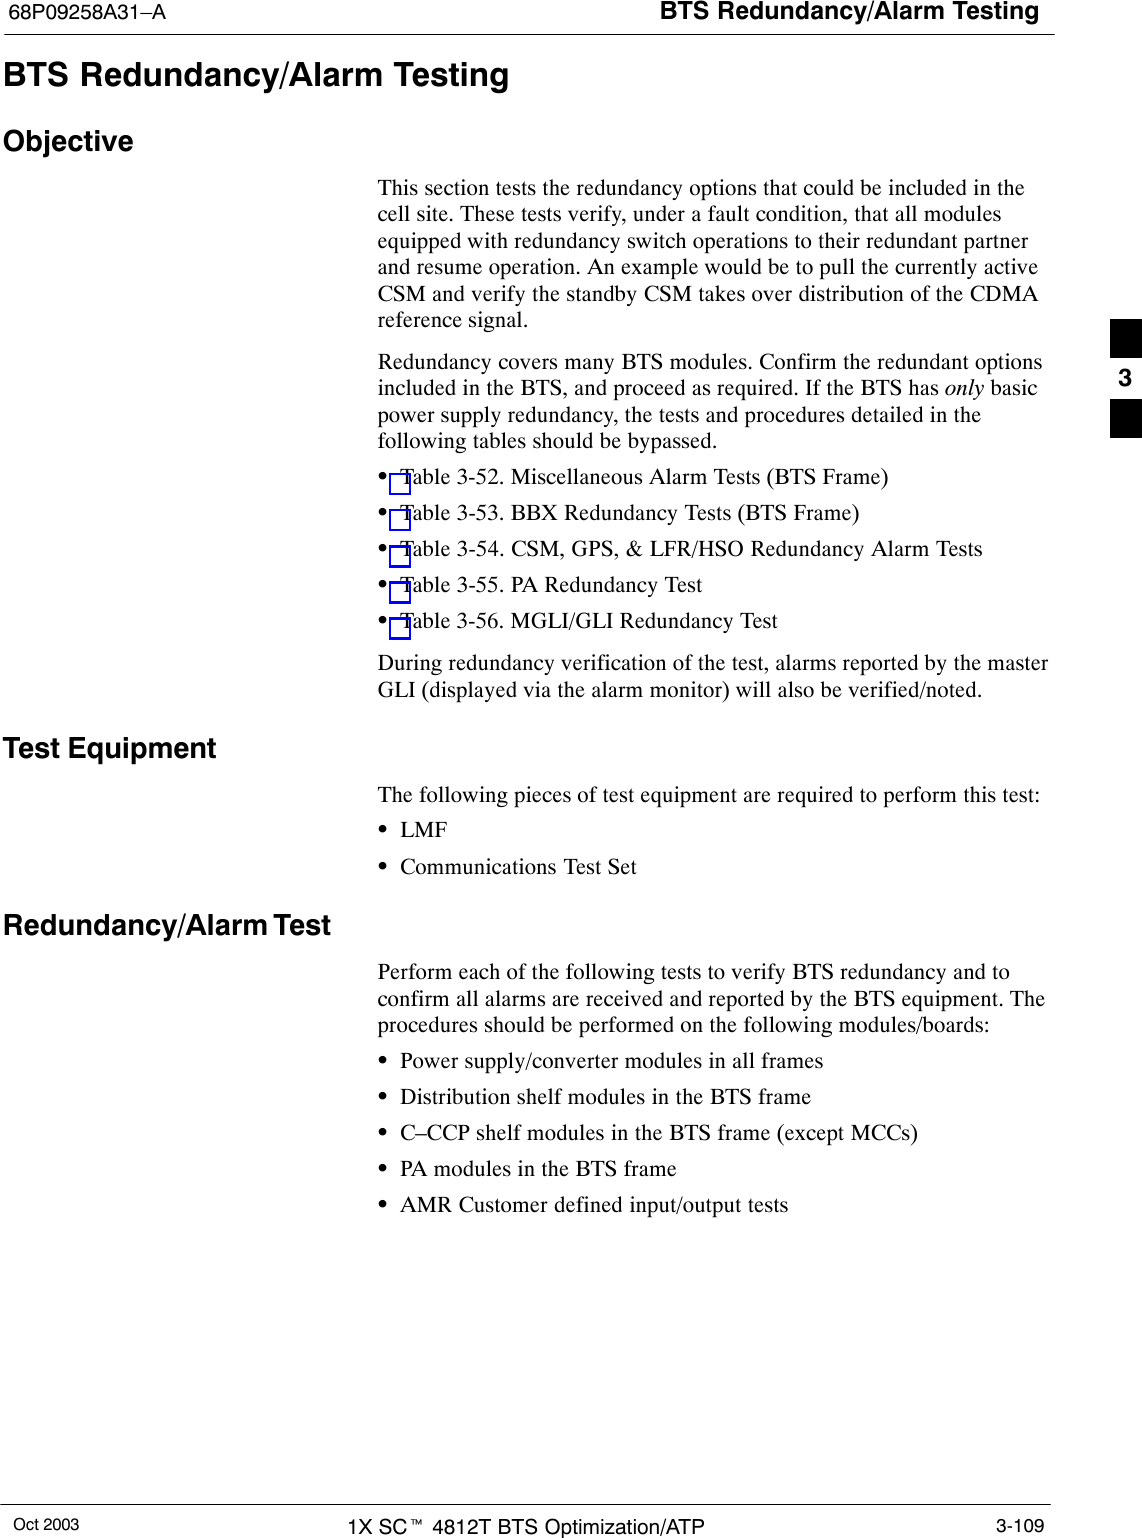 BTS Redundancy/Alarm Testing68P09258A31–AOct 2003 1X SCt 4812T BTS Optimization/ATP 3-109BTS Redundancy/Alarm TestingObjectiveThis section tests the redundancy options that could be included in thecell site. These tests verify, under a fault condition, that all modulesequipped with redundancy switch operations to their redundant partnerand resume operation. An example would be to pull the currently activeCSM and verify the standby CSM takes over distribution of the CDMAreference signal.Redundancy covers many BTS modules. Confirm the redundant optionsincluded in the BTS, and proceed as required. If the BTS has only basicpower supply redundancy, the tests and procedures detailed in thefollowing tables should be bypassed.STable 3-52. Miscellaneous Alarm Tests (BTS Frame)STable 3-53. BBX Redundancy Tests (BTS Frame)STable 3-54. CSM, GPS, &amp; LFR/HSO Redundancy Alarm TestsSTable 3-55. PA Redundancy TestSTable 3-56. MGLI/GLI Redundancy TestDuring redundancy verification of the test, alarms reported by the masterGLI (displayed via the alarm monitor) will also be verified/noted.Test EquipmentThe following pieces of test equipment are required to perform this test:SLMFSCommunications Test SetRedundancy/Alarm TestPerform each of the following tests to verify BTS redundancy and toconfirm all alarms are received and reported by the BTS equipment. Theprocedures should be performed on the following modules/boards:SPower supply/converter modules in all framesSDistribution shelf modules in the BTS frameSC–CCP shelf modules in the BTS frame (except MCCs)SPA modules in the BTS frameSAMR Customer defined input/output tests3